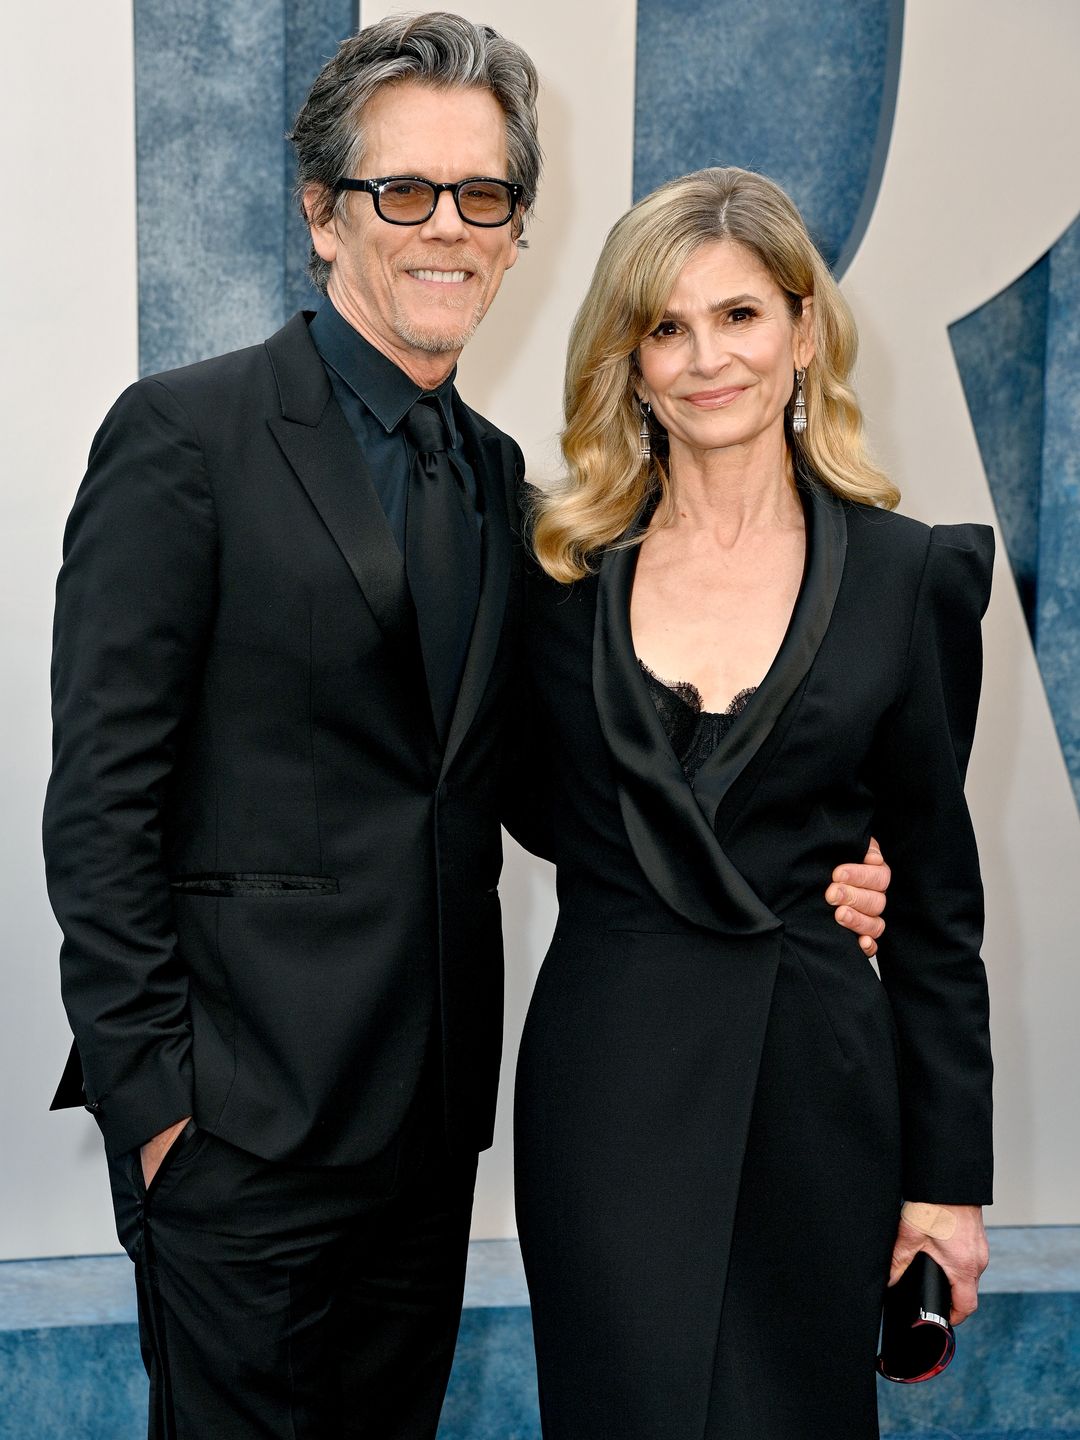 Kevin Bacon and Kyra Sedgwick smiling on a red carpet